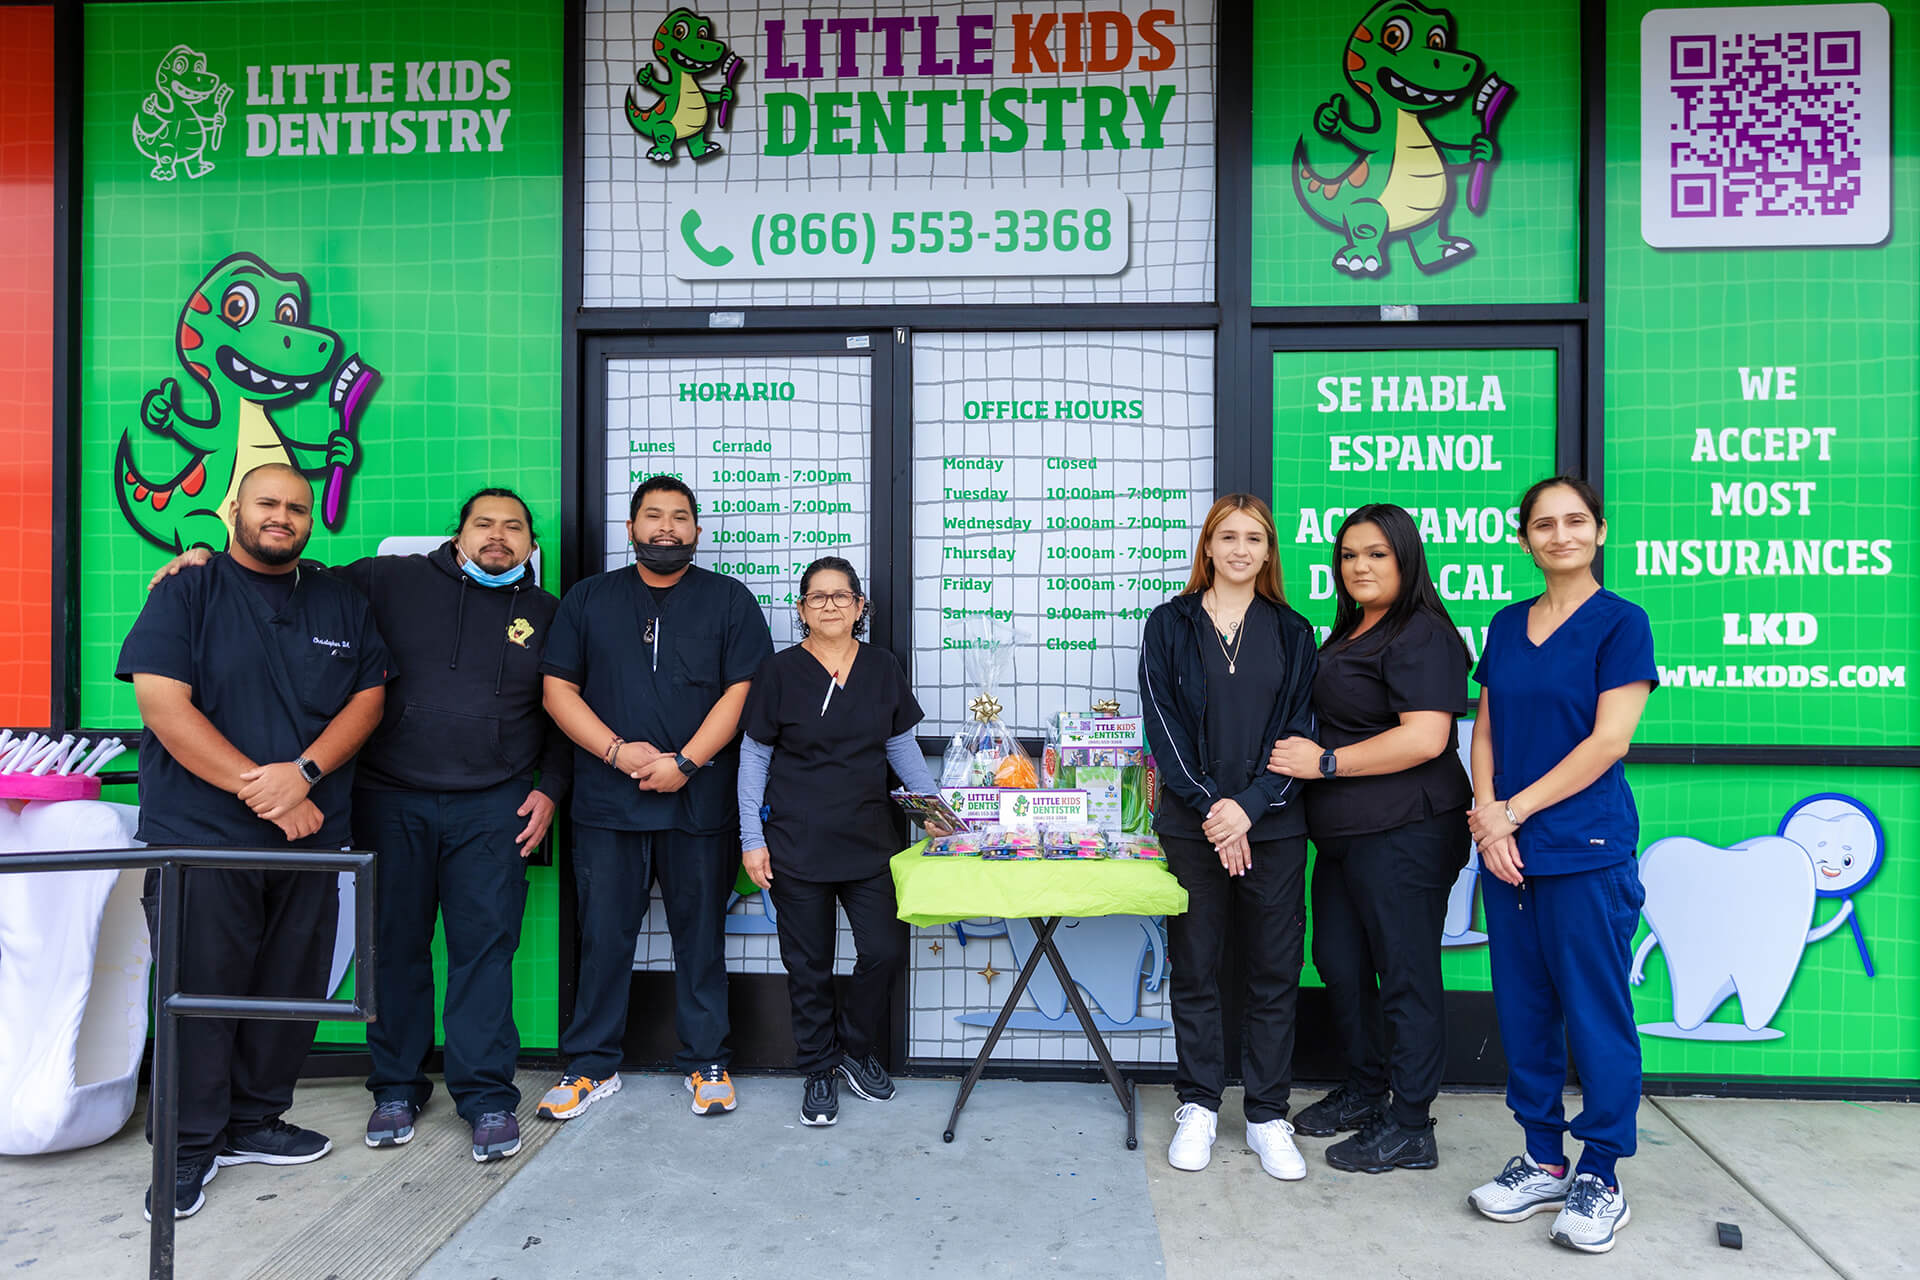 New Office in Panorama City - Little Kids Dentistry Expands Its Services